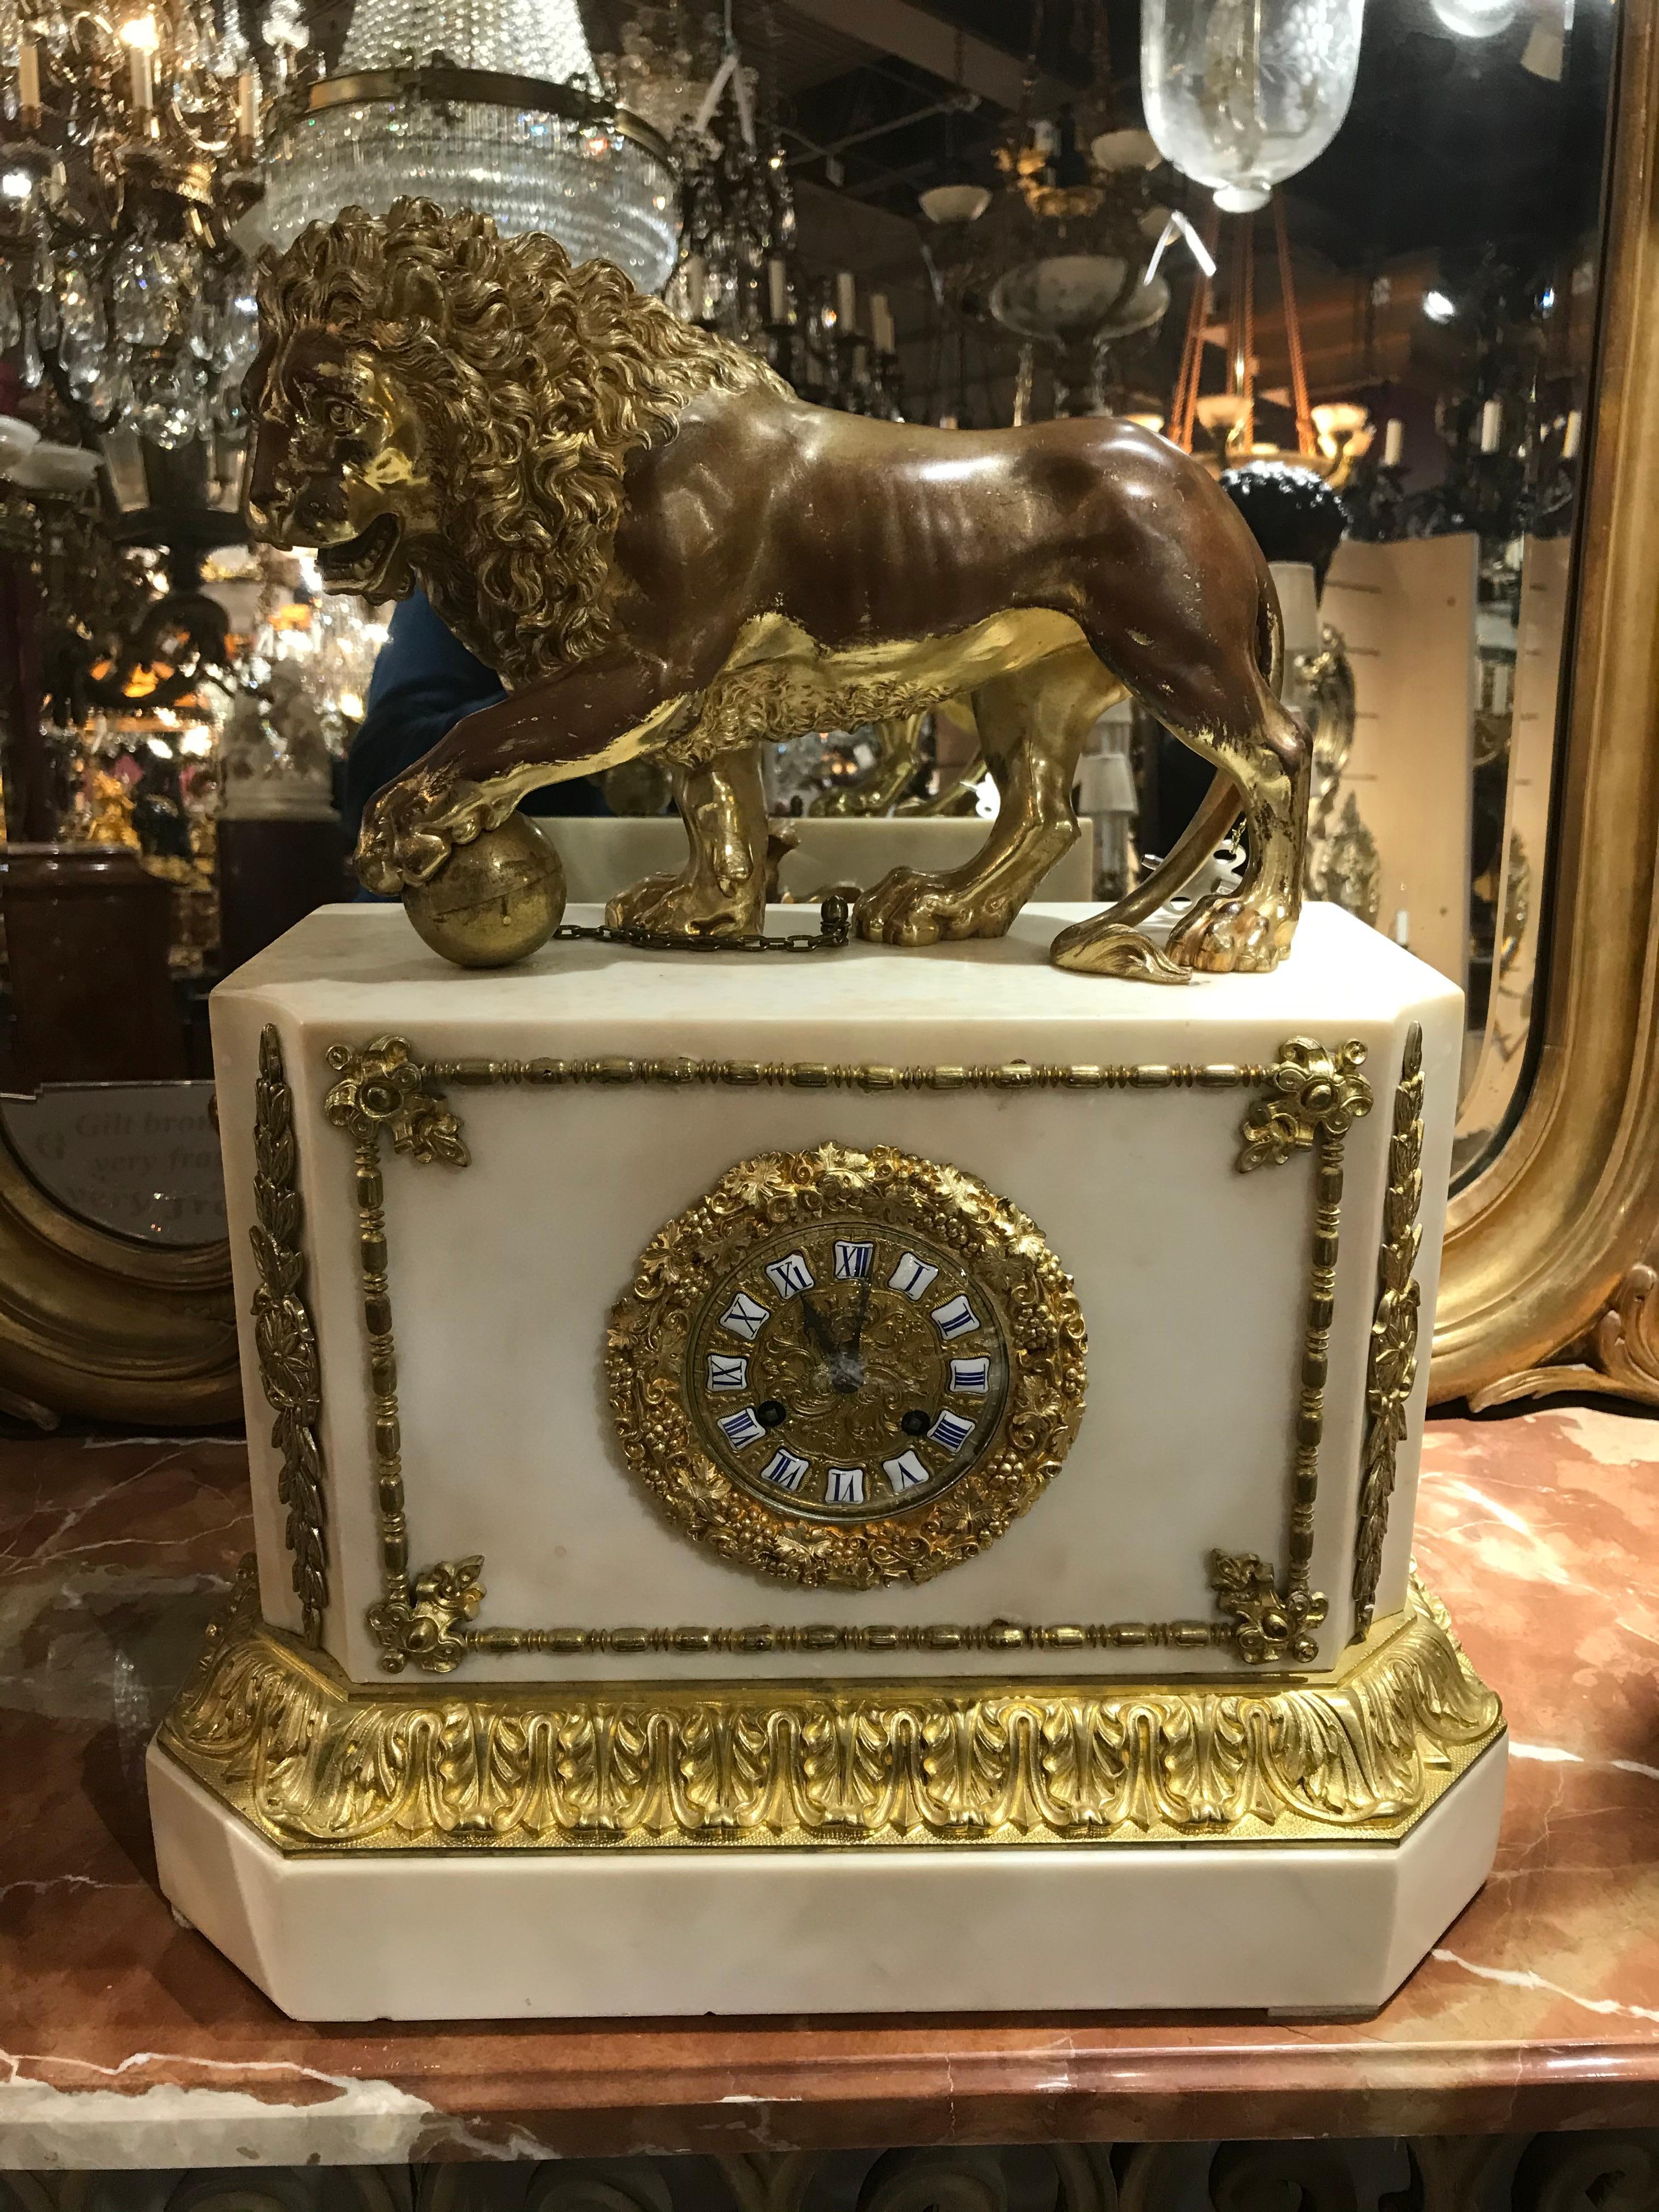 A very fine gilt bronze and marble clock featuring a lion. Marble case, ornate face with enameled Roman numerals. France, circa 1880
Dimensions: Height 21